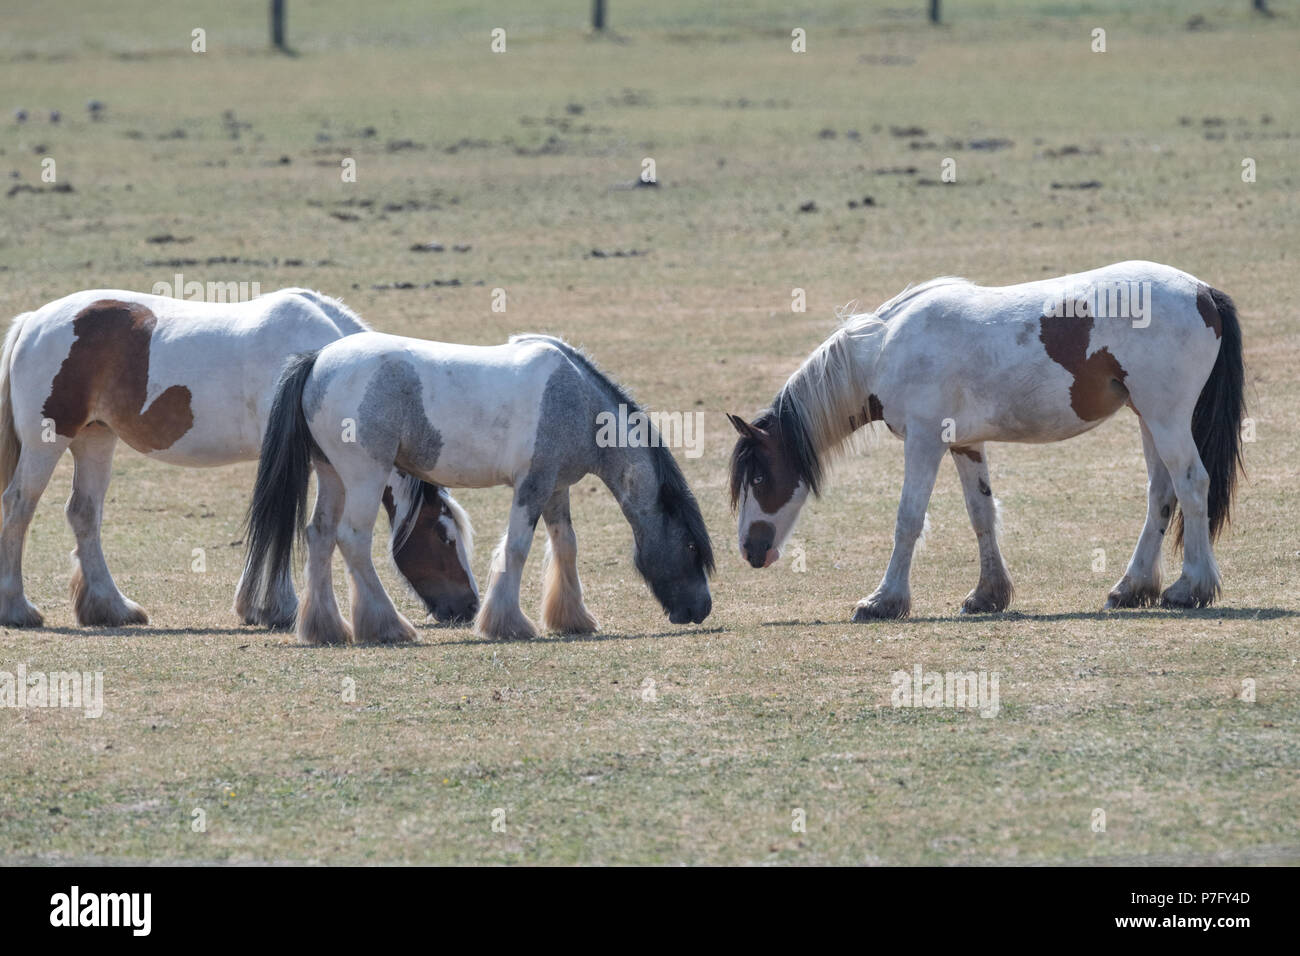 Newstead, Nottinghamshire, England. 6th. July 2018. UK. Weather. Horses in a paddock finding feeding difficult with no fresh green grass to eat as the hot and dry weather continues across all parts of the U.K.Alan Beastall/Alamy Live News Stock Photo